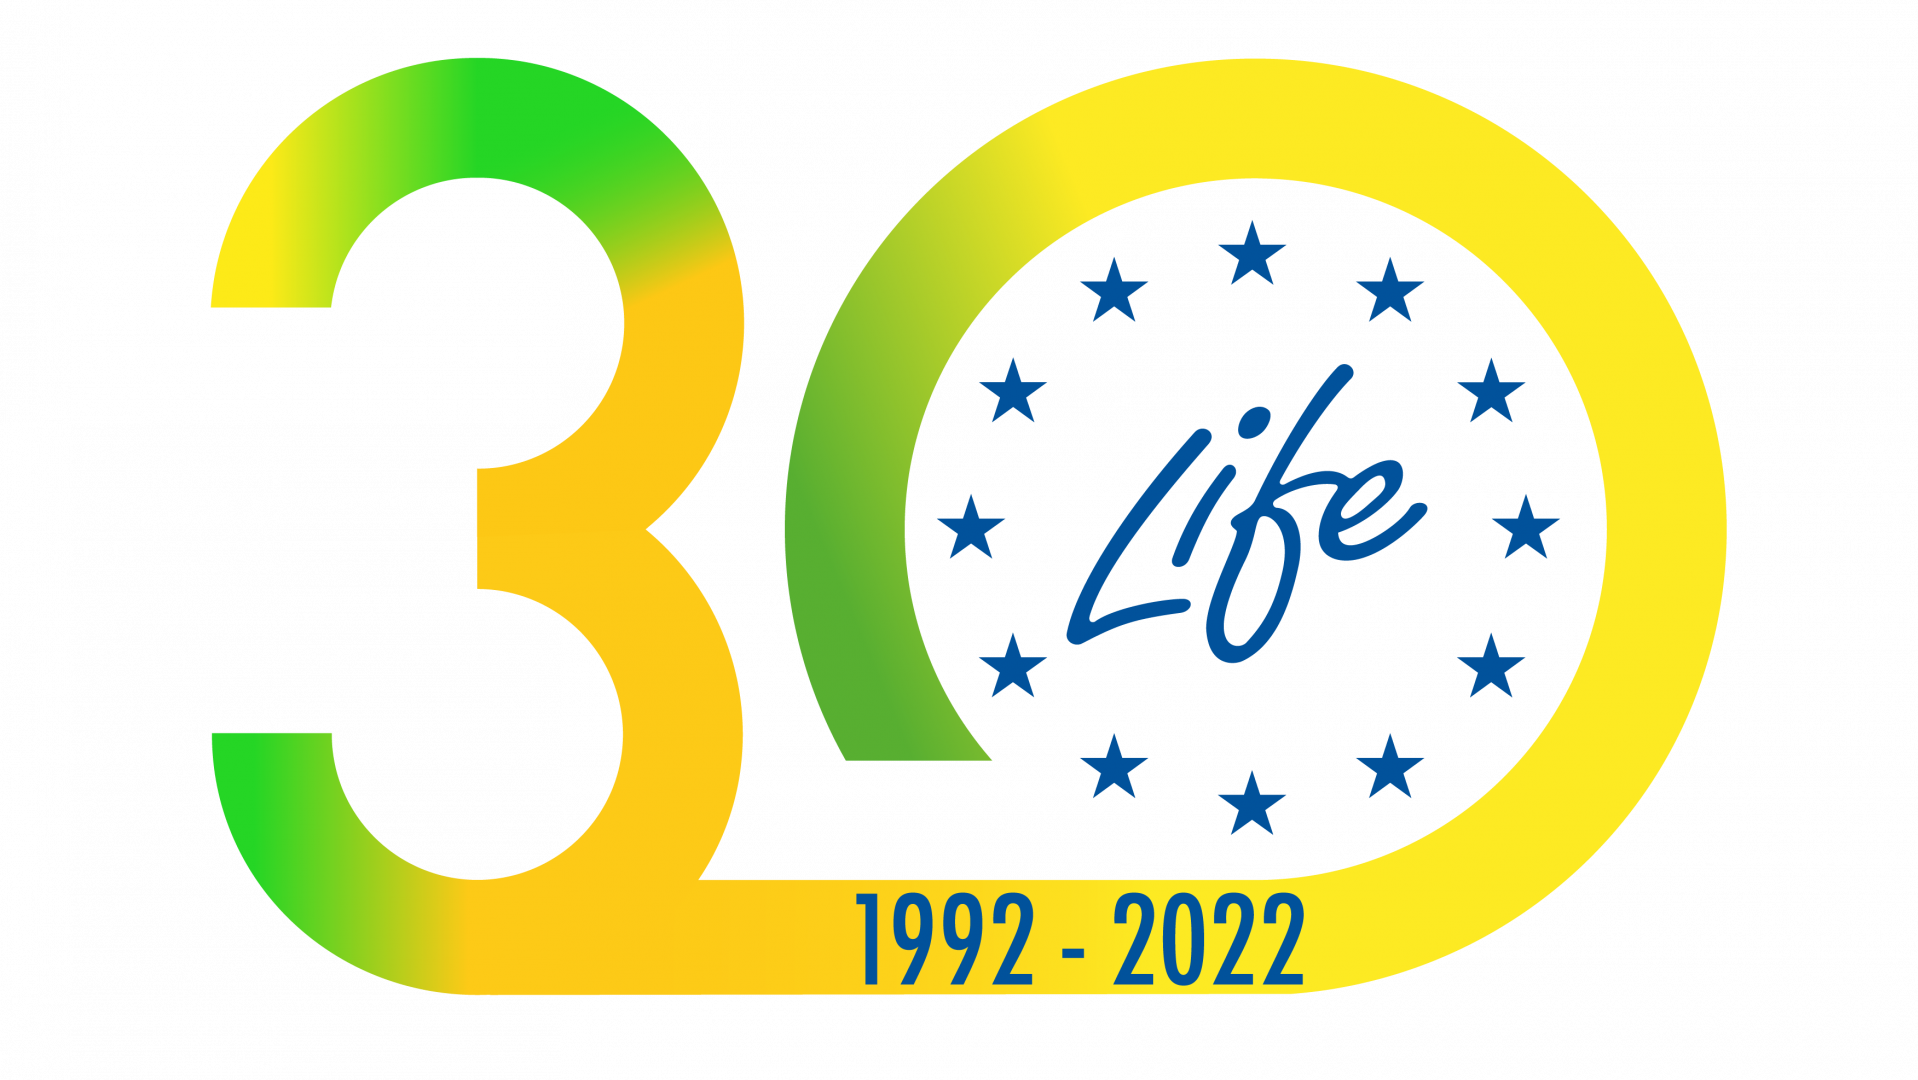 LIFE has been financing nature conservation projects for 30 years